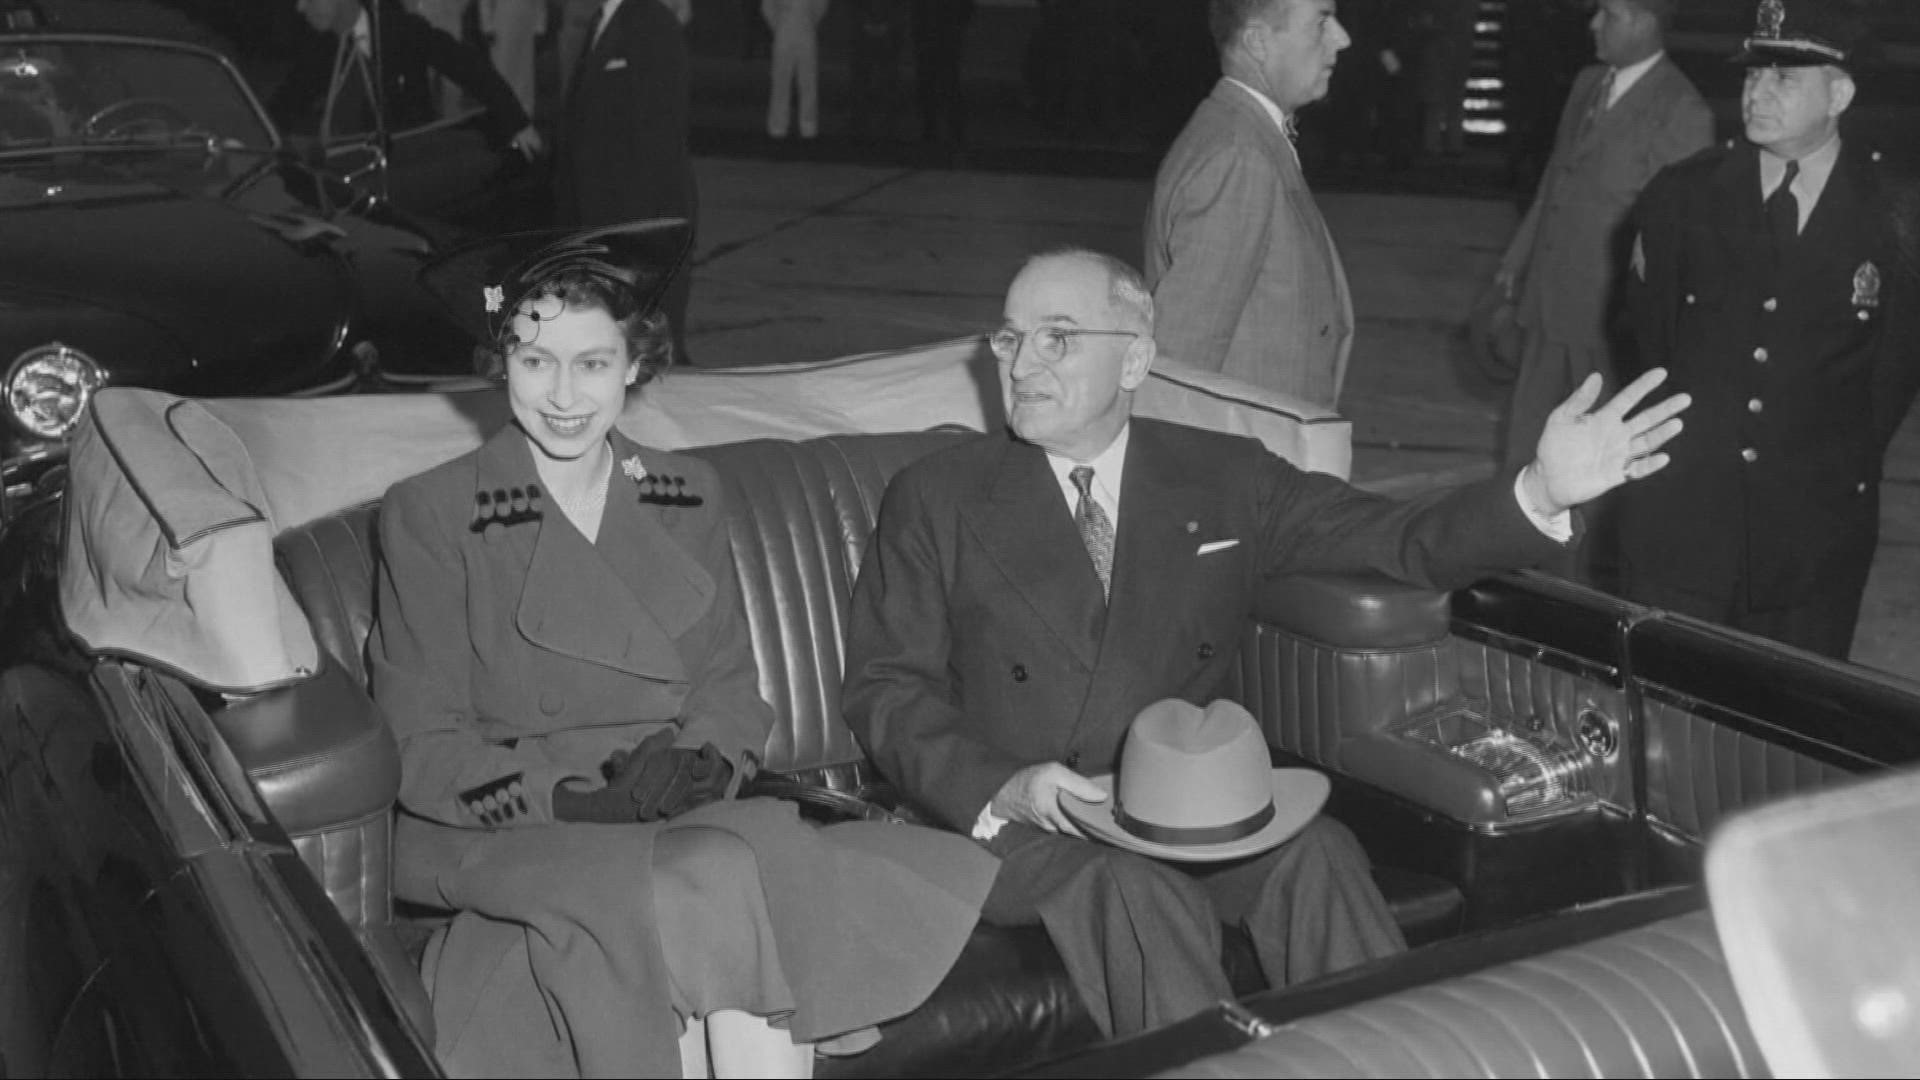 Queen Elizabeth's death is resonating with millions of Americans. Here's a look at her special relationship with the United States.